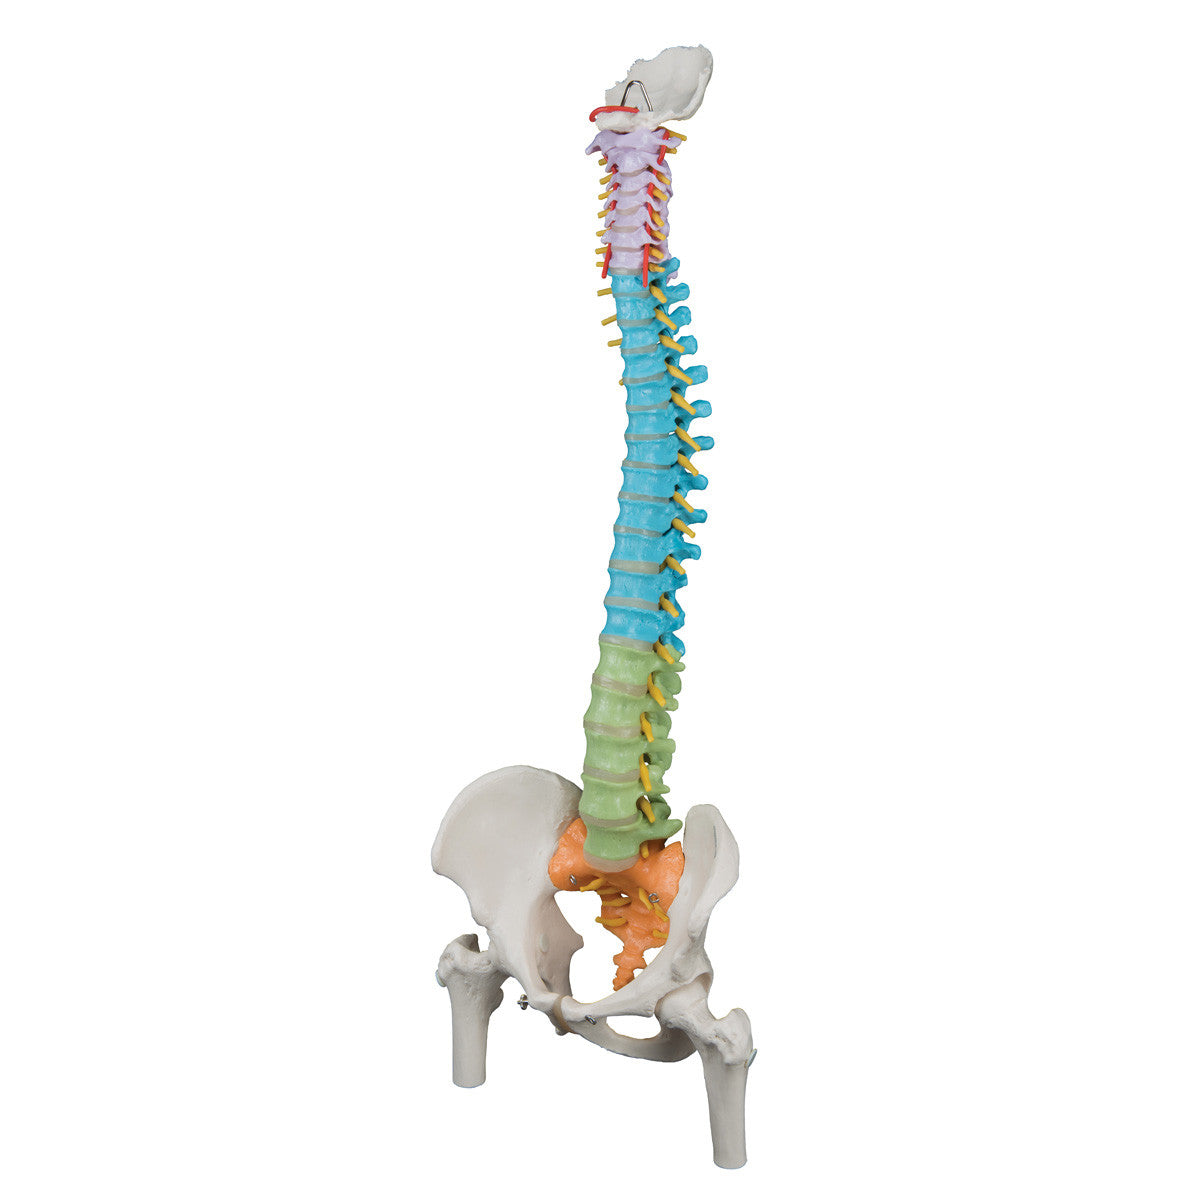 Didactic Flexible Spine with Femur Heads